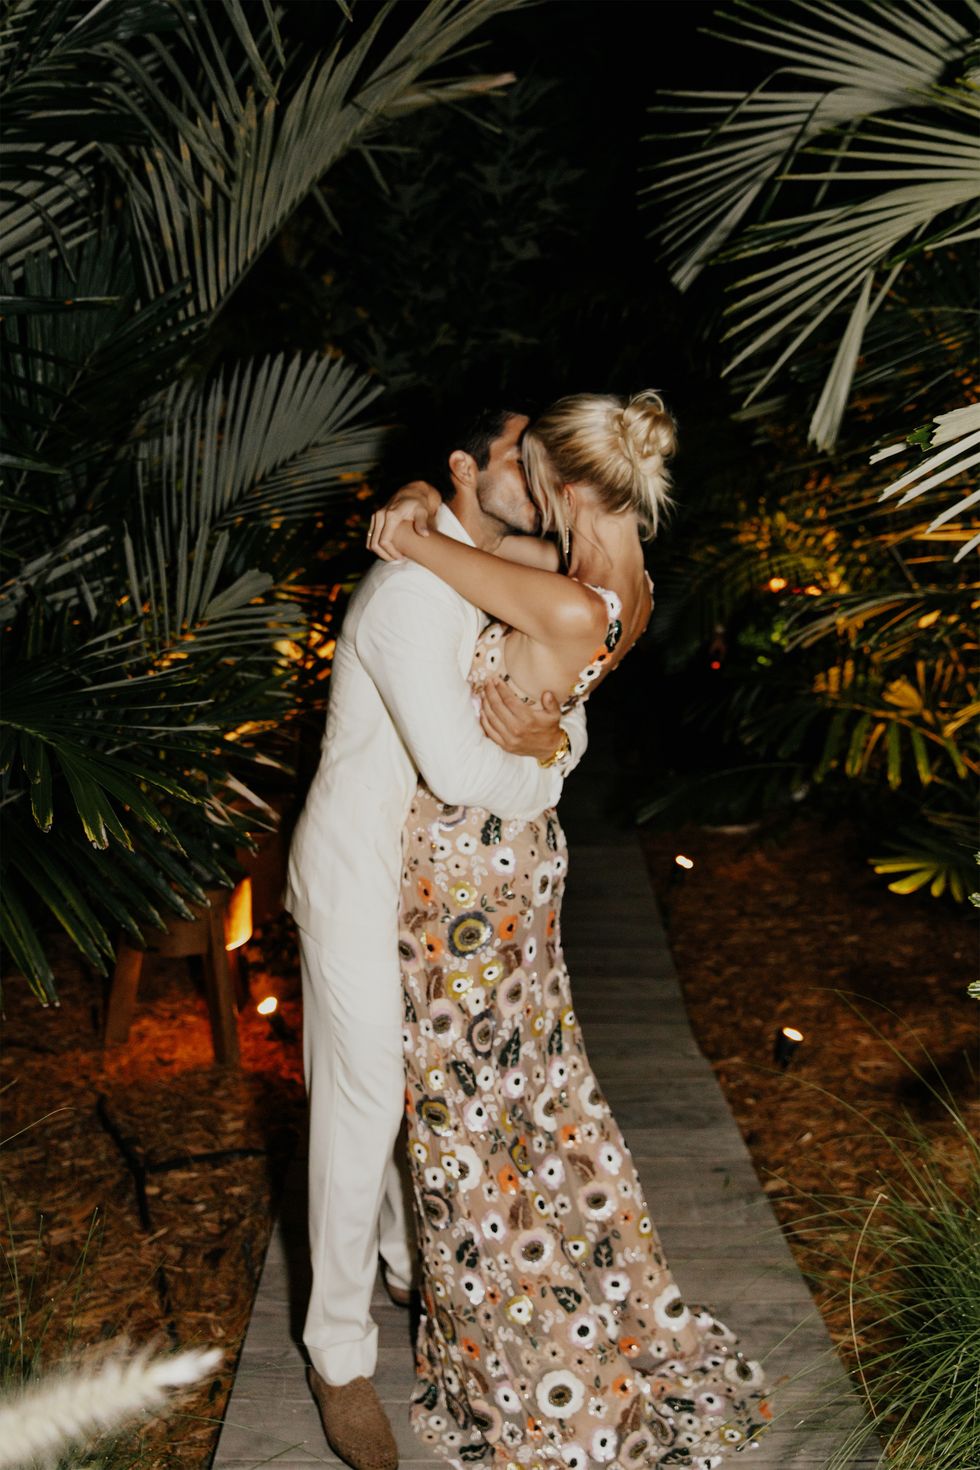 Devon Windsor's Wedding Outfits Are Simply Stunning